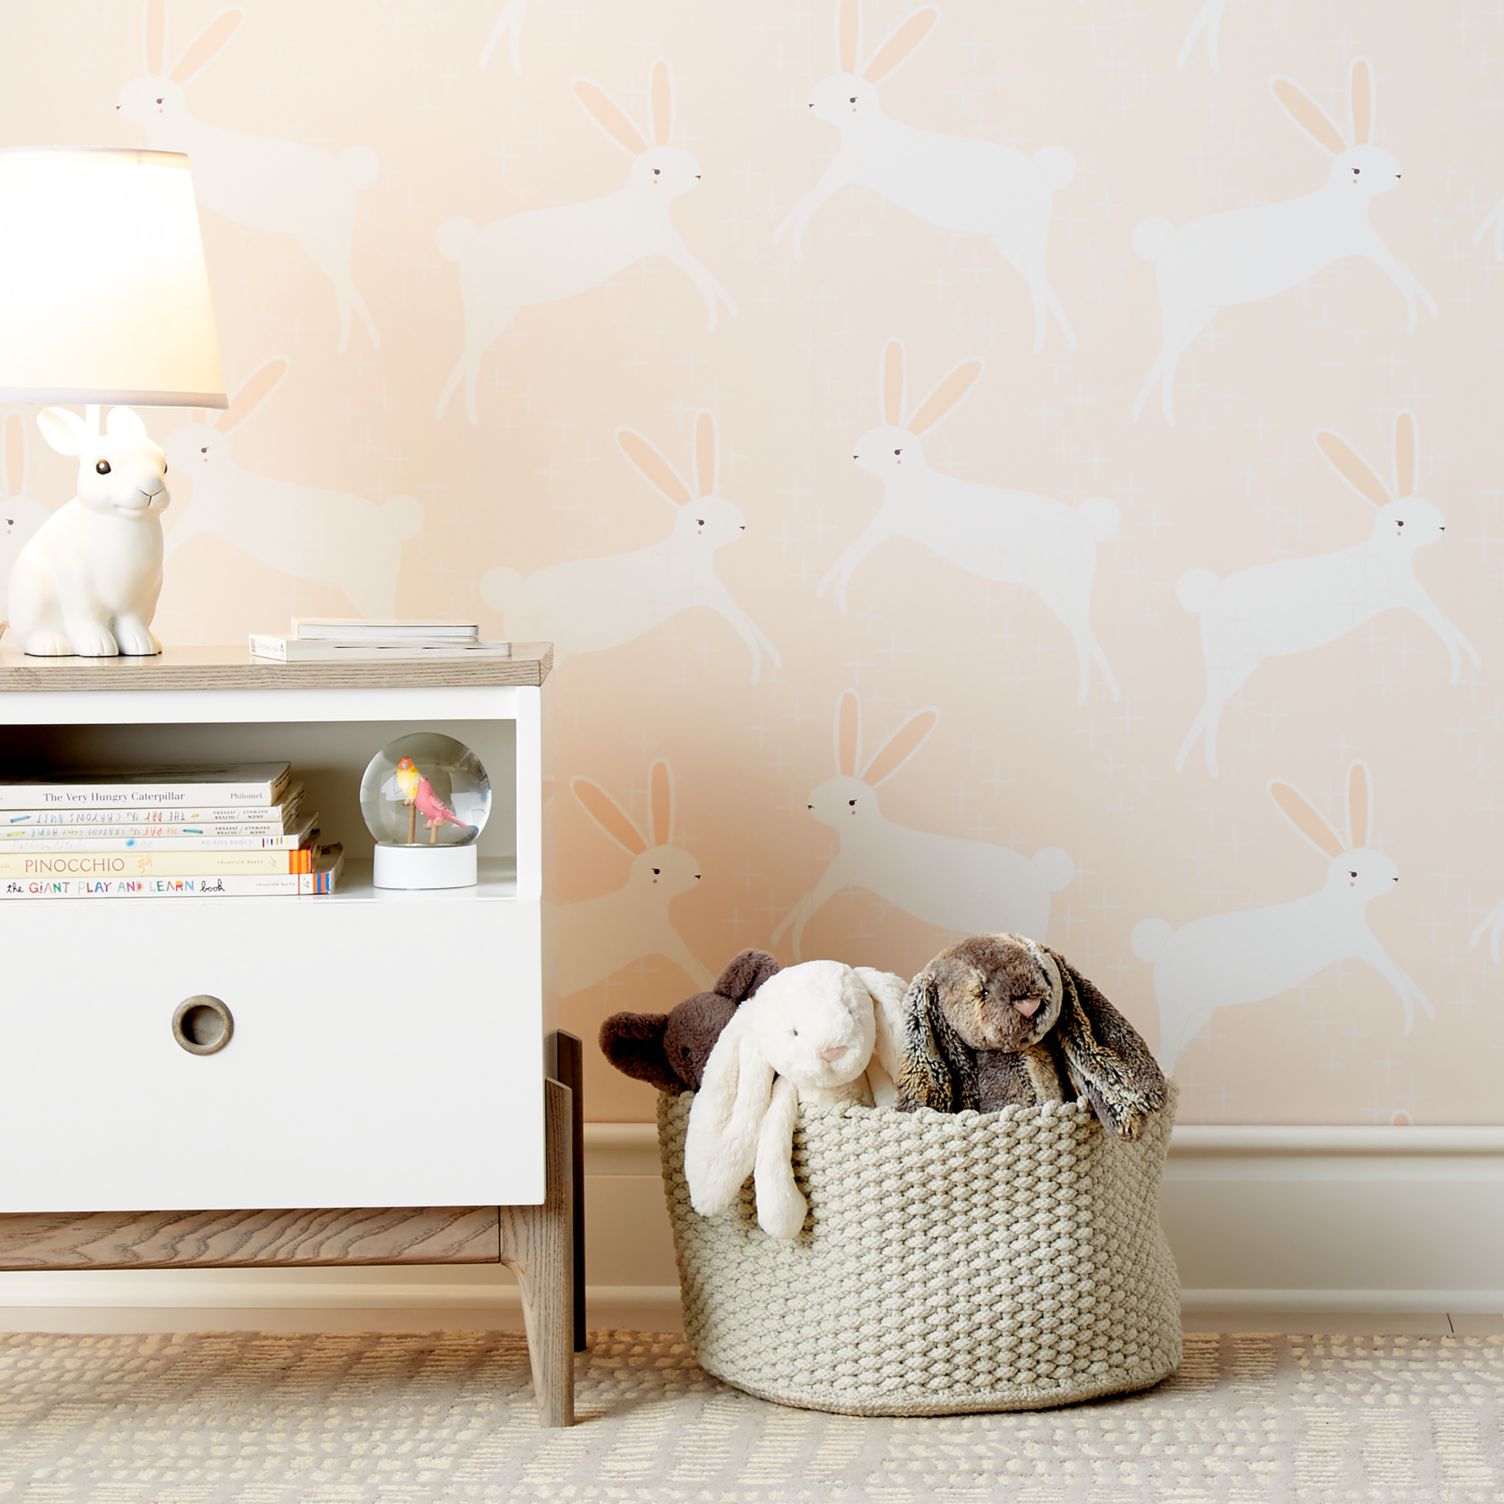 Bunny wallpaper from Crate & Kids